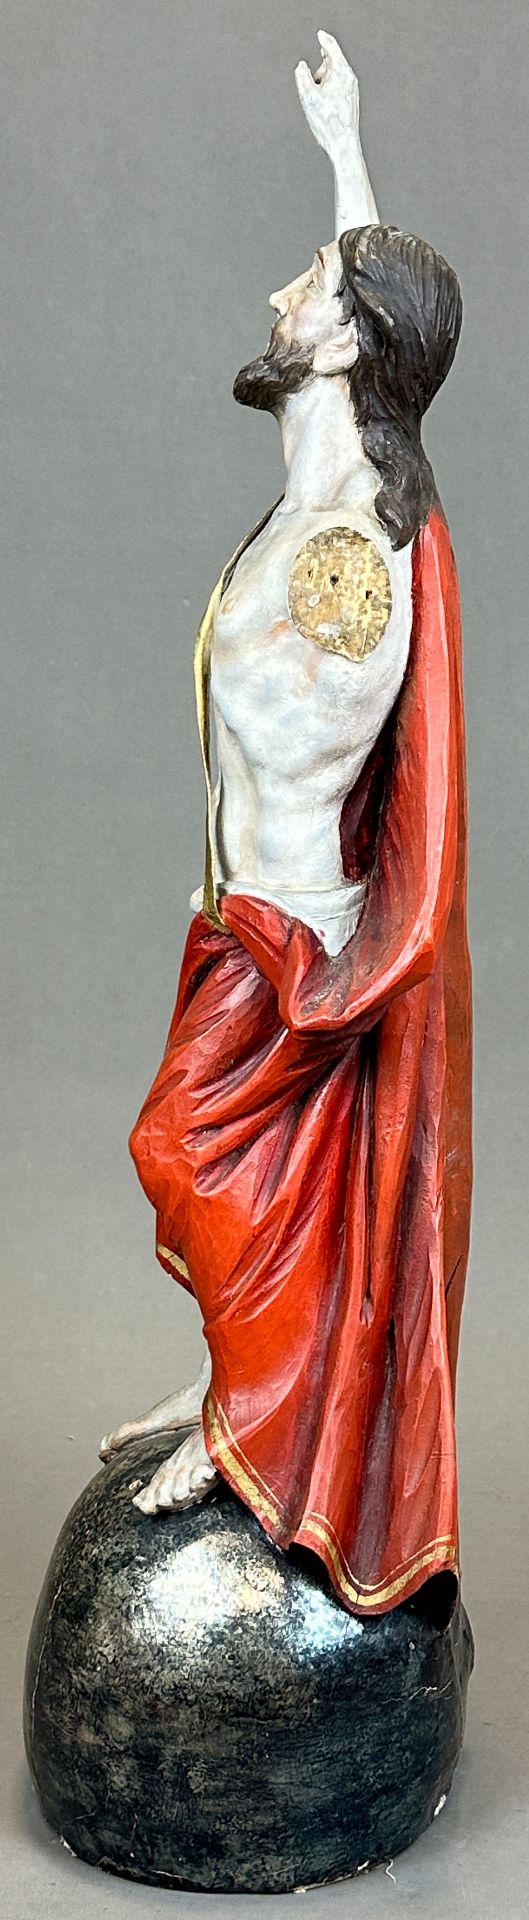 Wooden figure. Jesus Christ risen from the dead. 19th century. South Germany. - Image 2 of 11